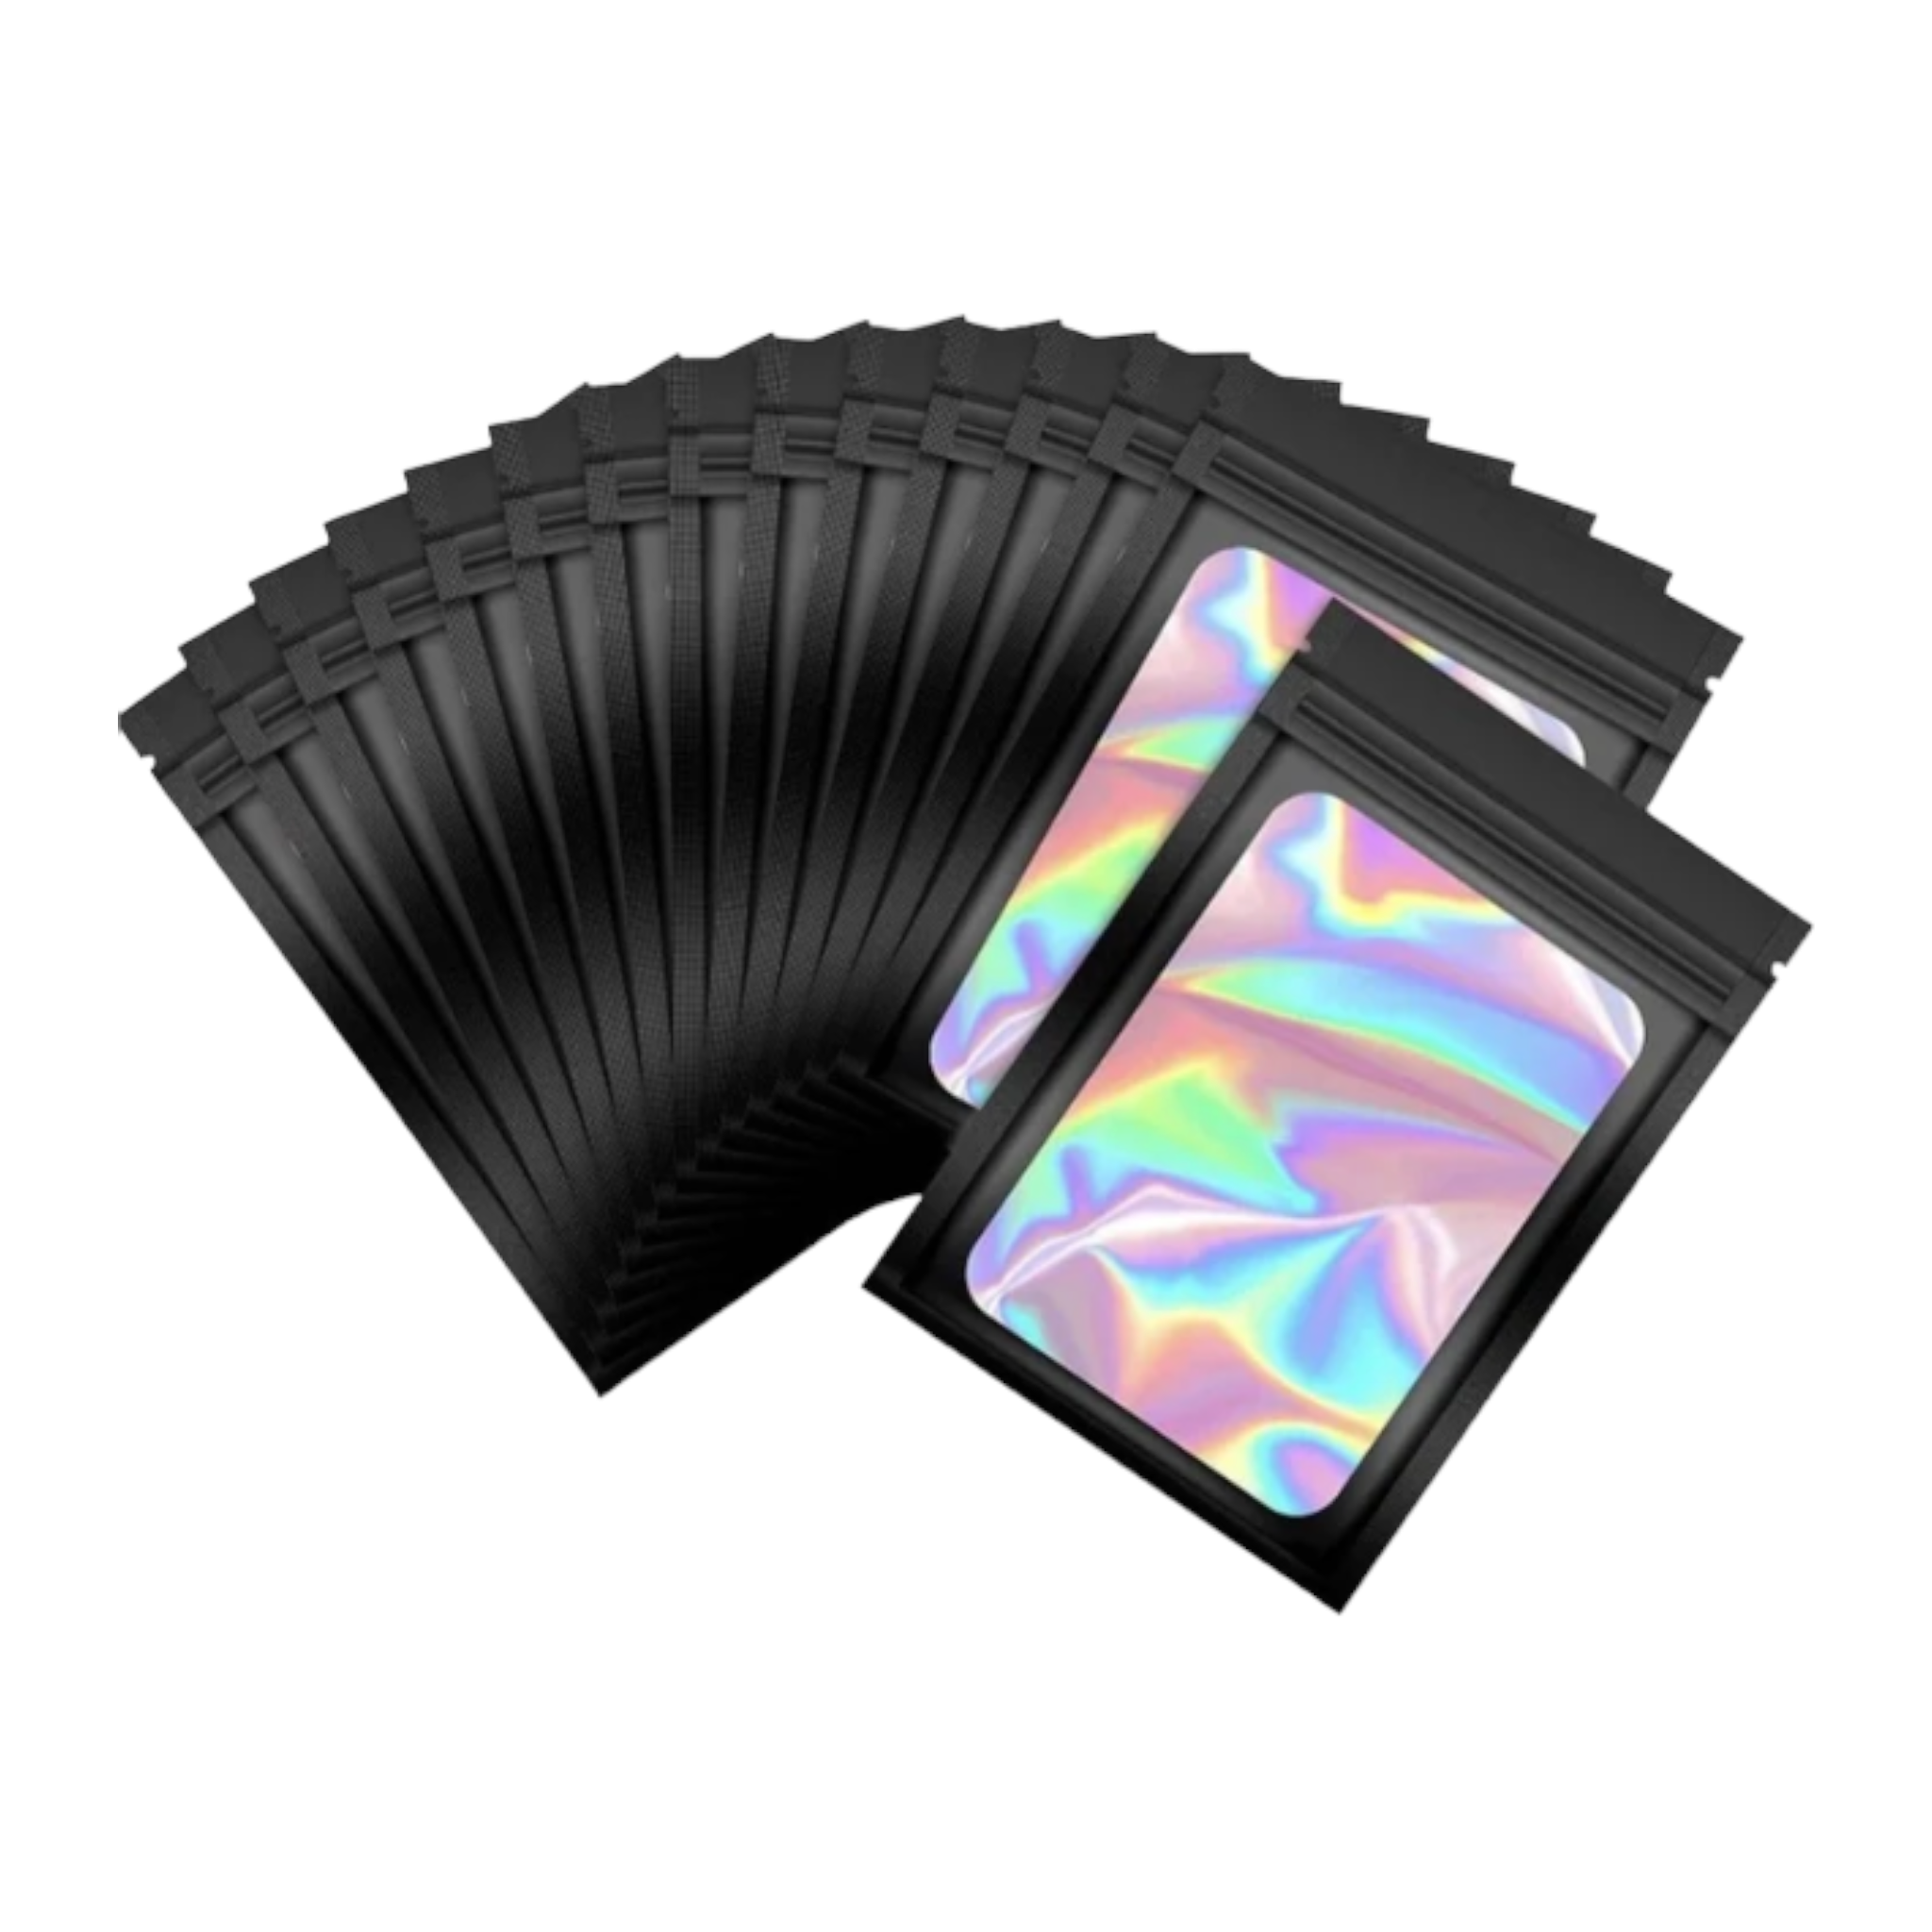 Holographic Resealable Bags 18x26cm Clear Window 10pack